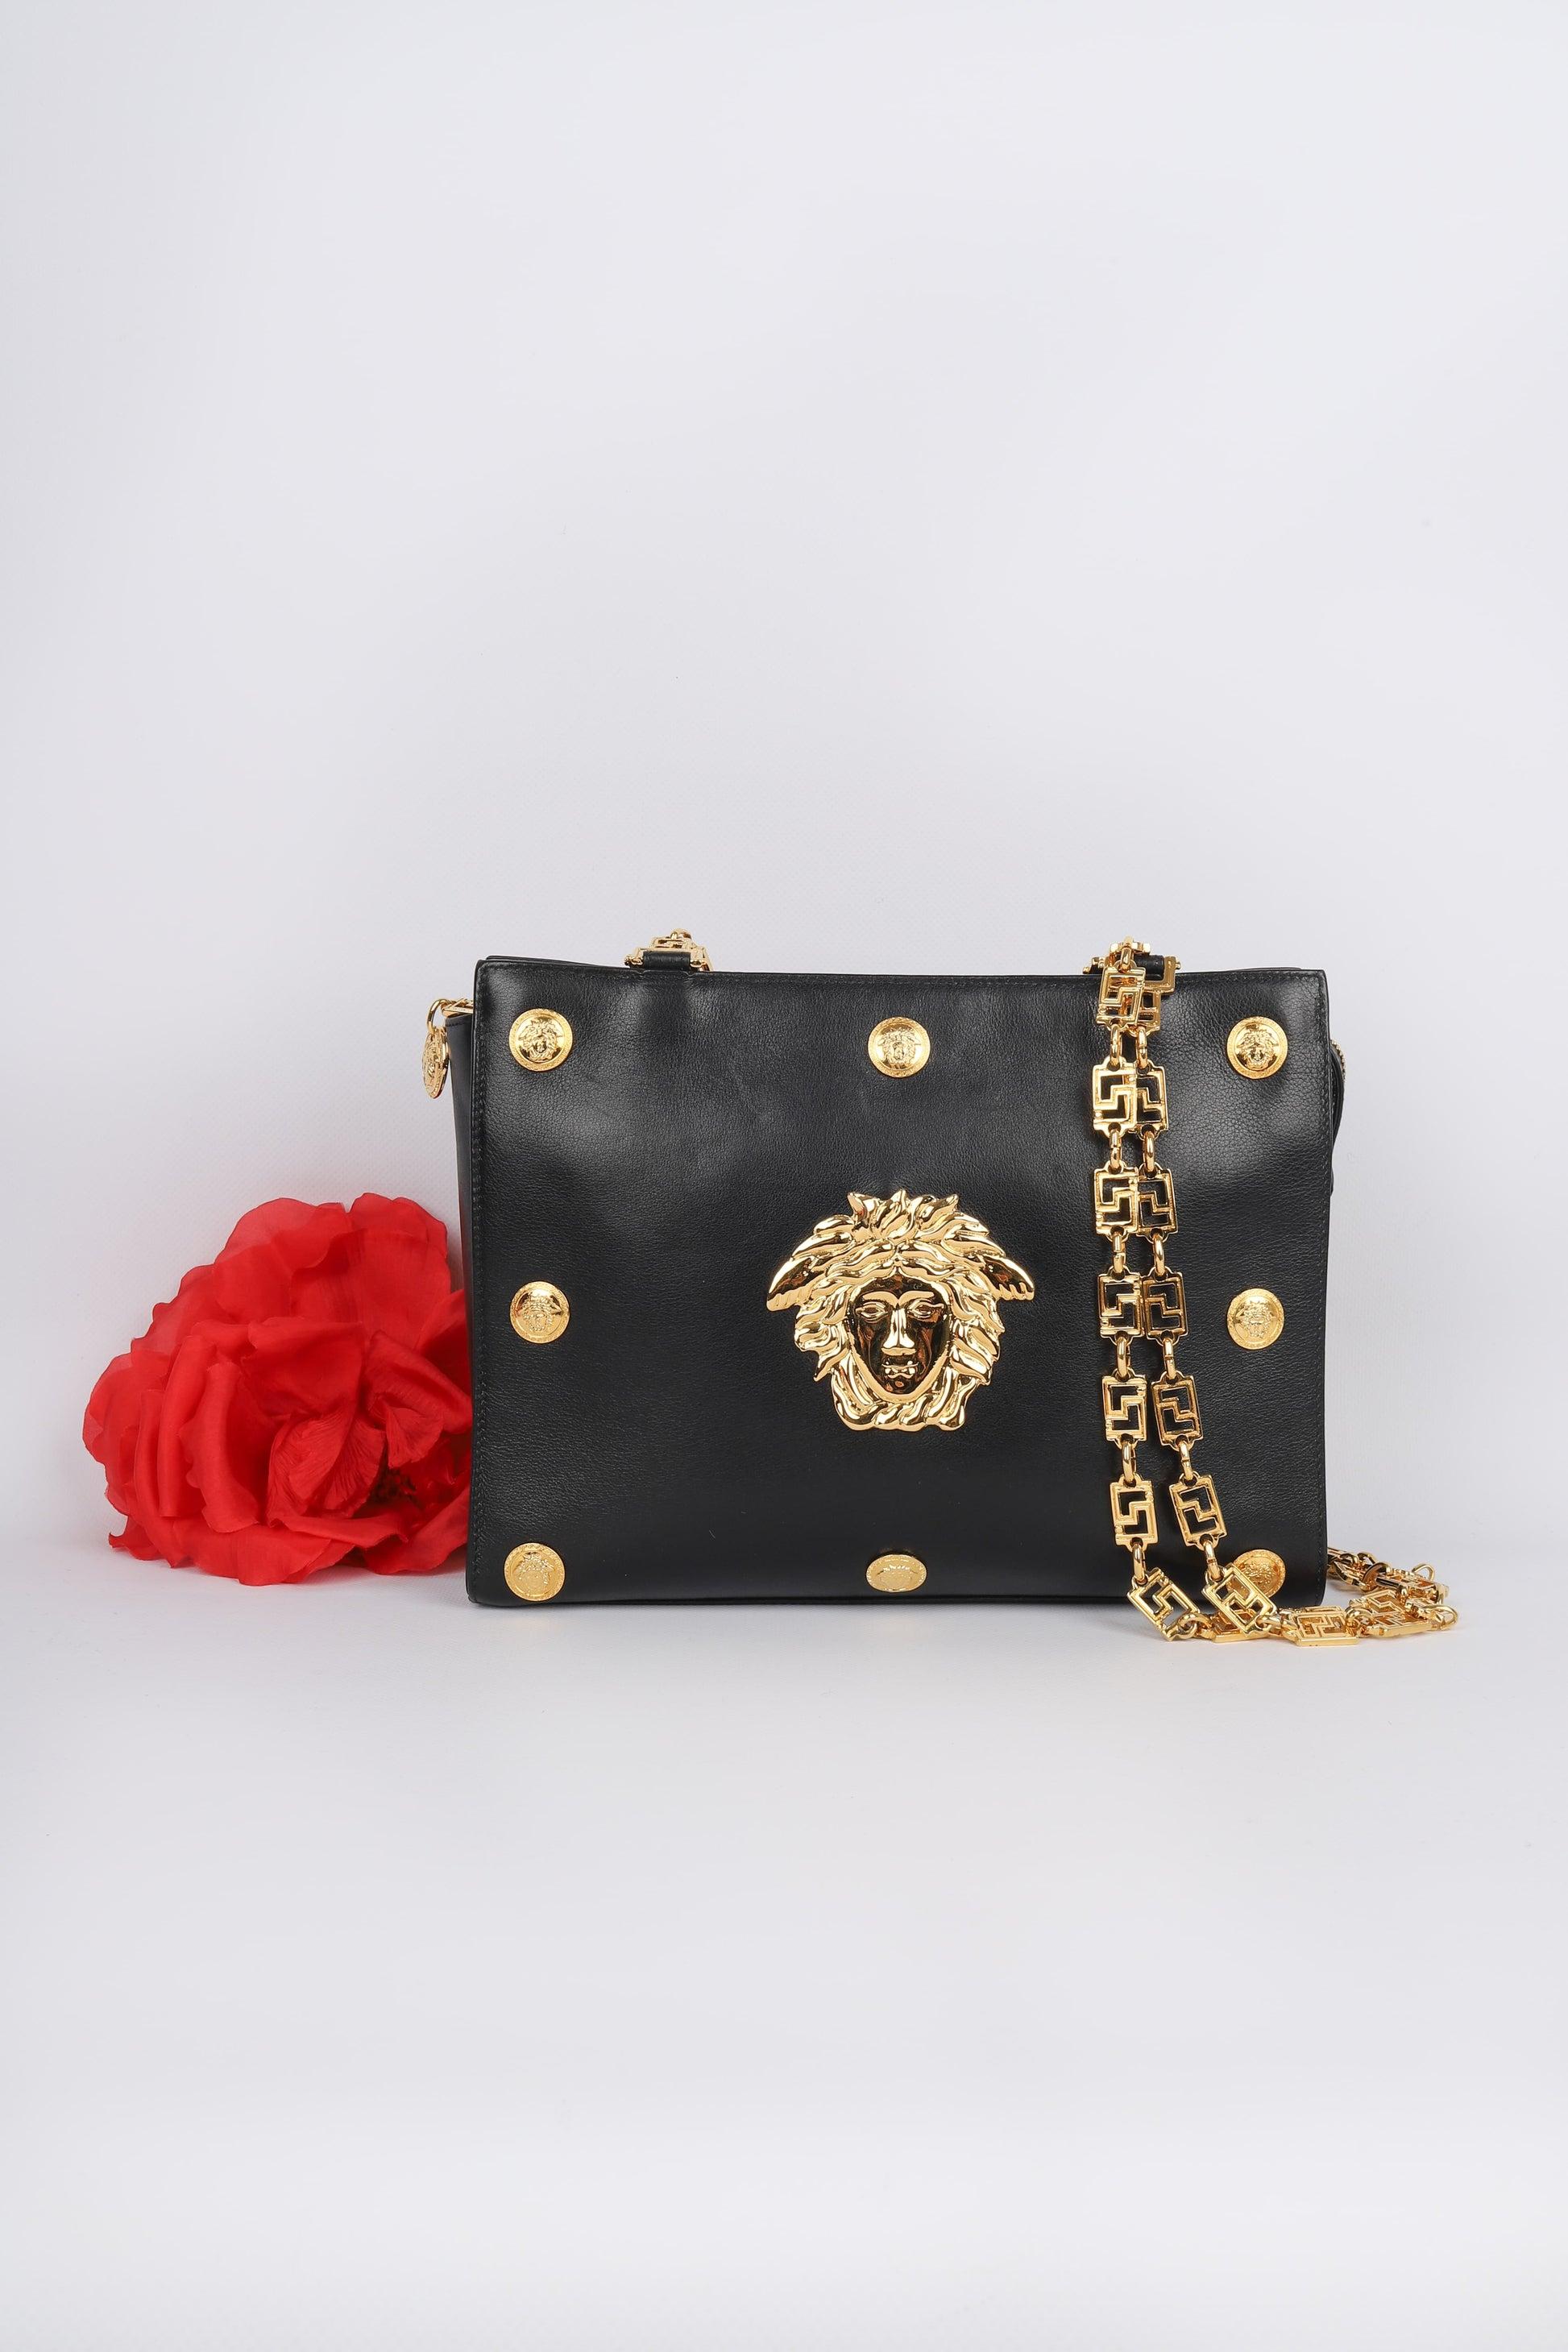 Gianni Versace Black Leather Bag with Golden Metal Elements 5